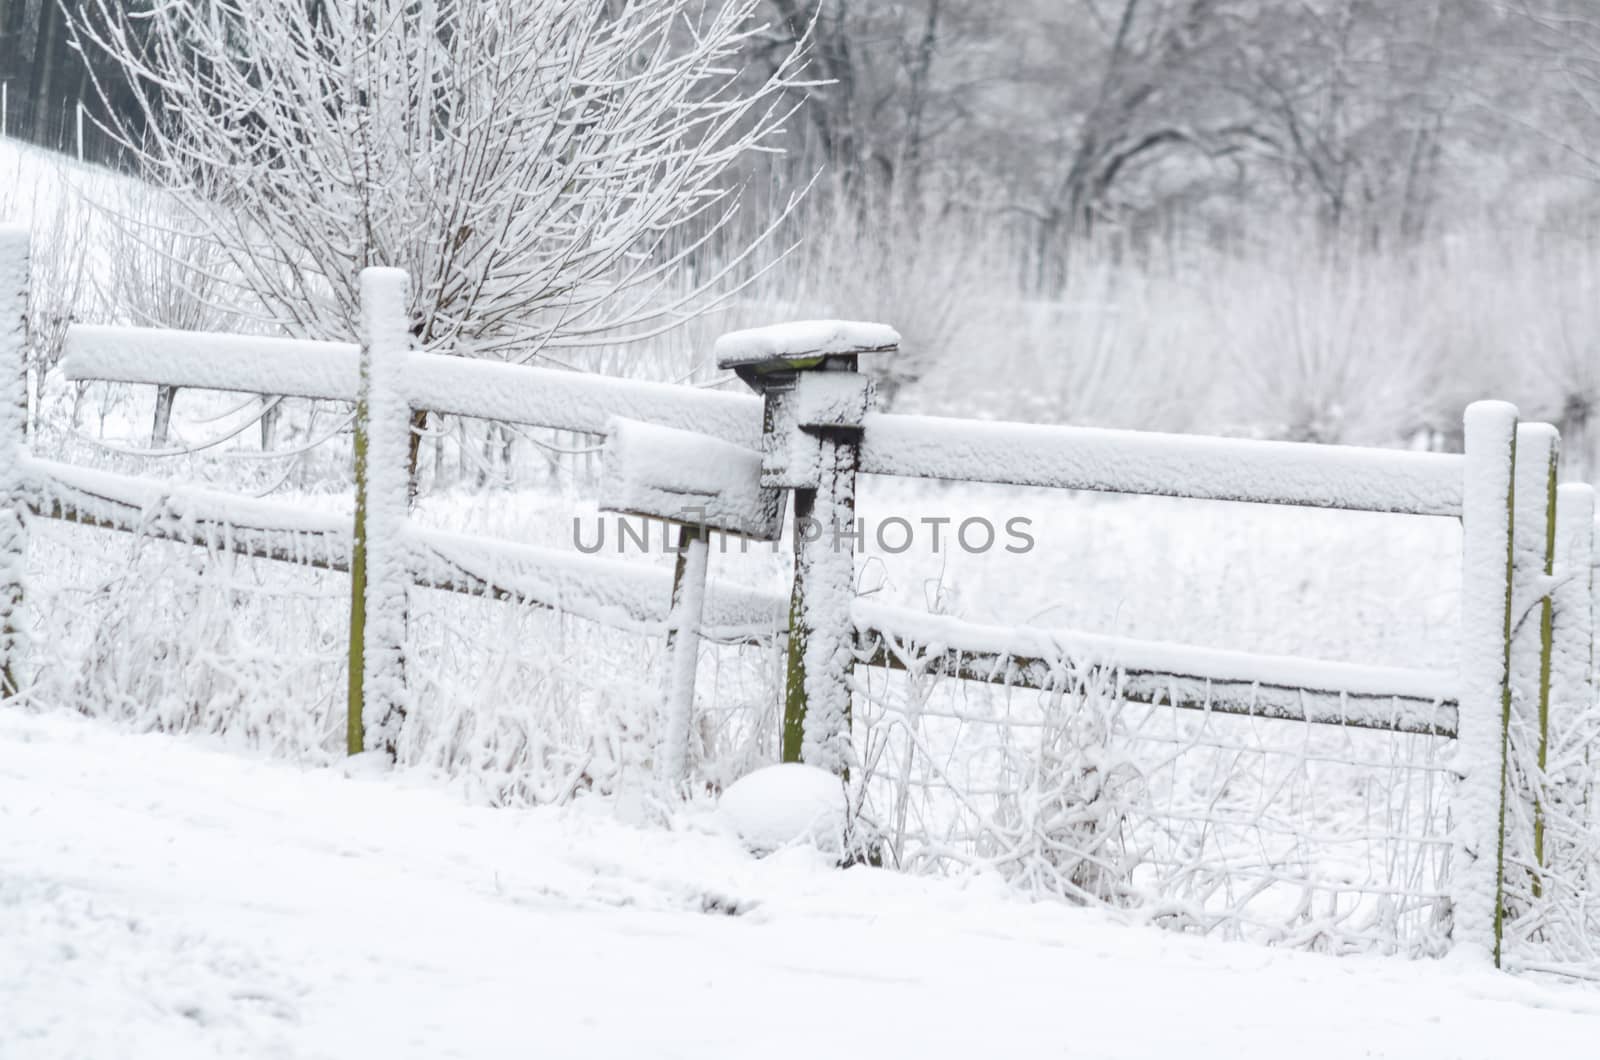 Mailbox in the snow by JFsPic